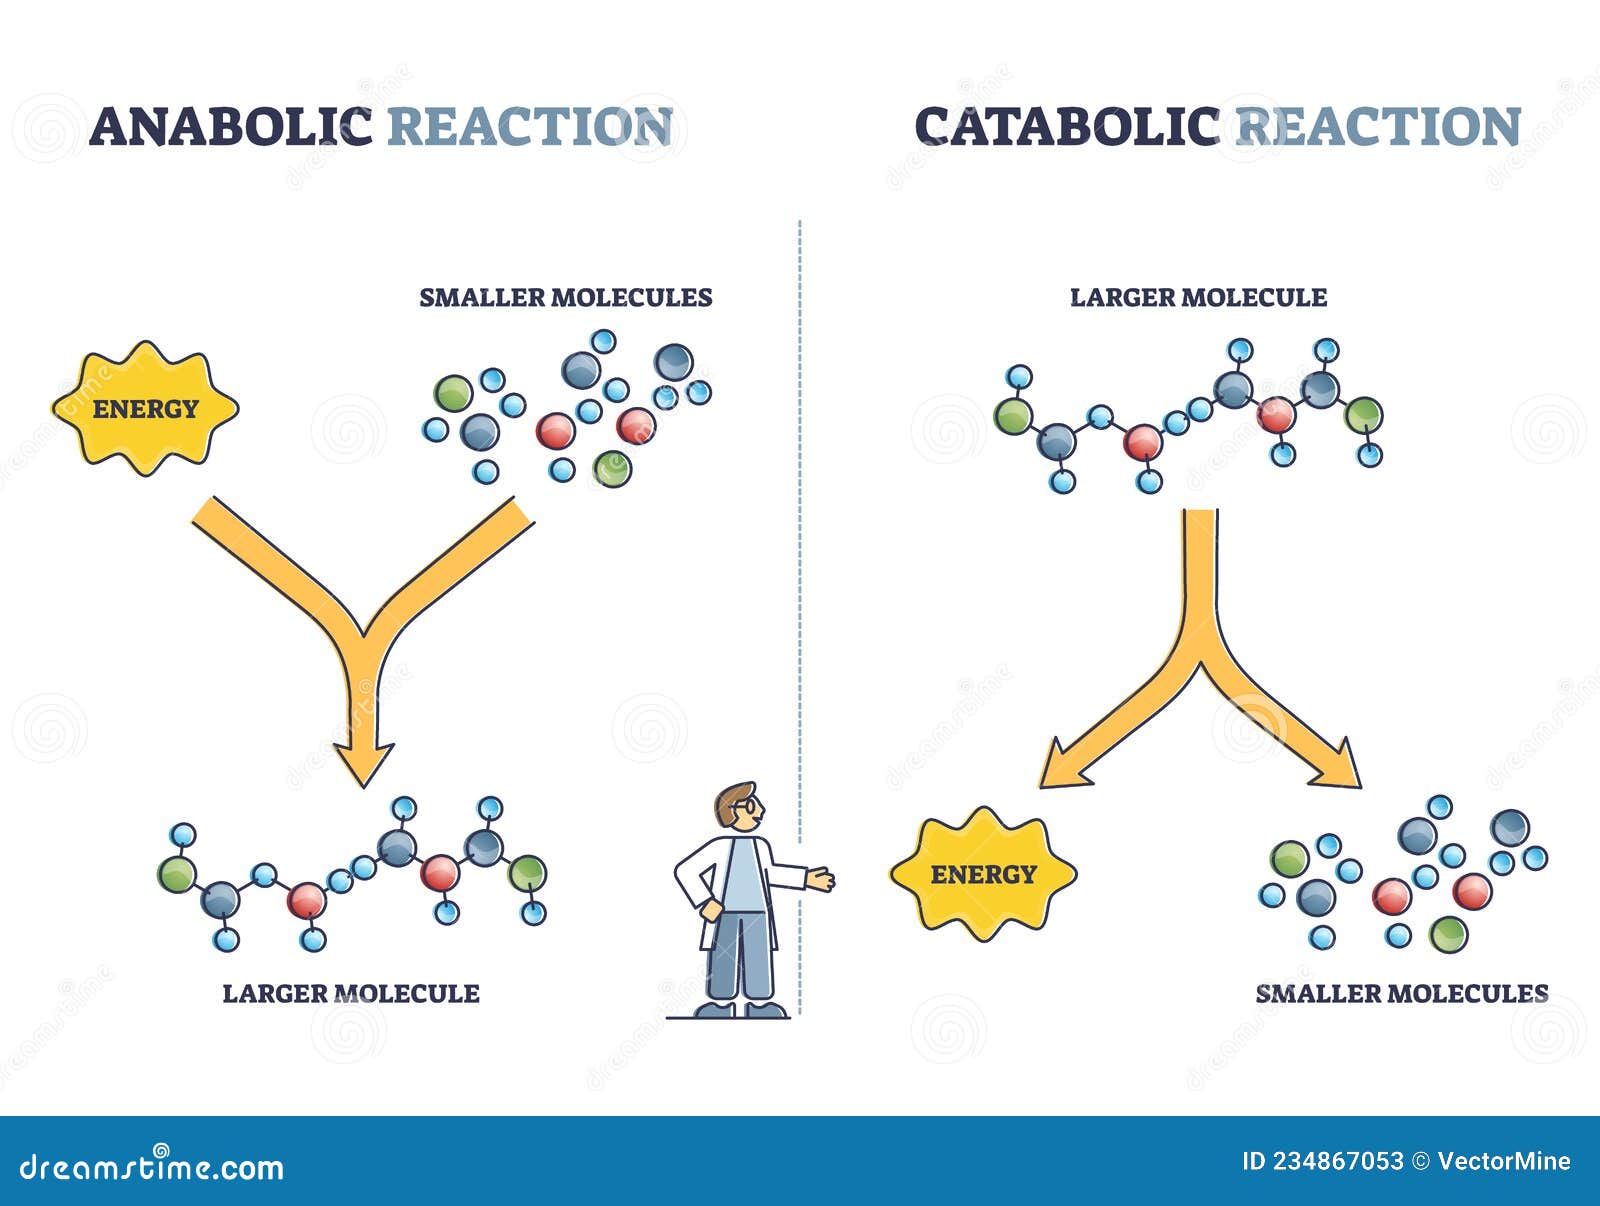 anabolic vs catabolic reaction comparison in metabolism outline diagram